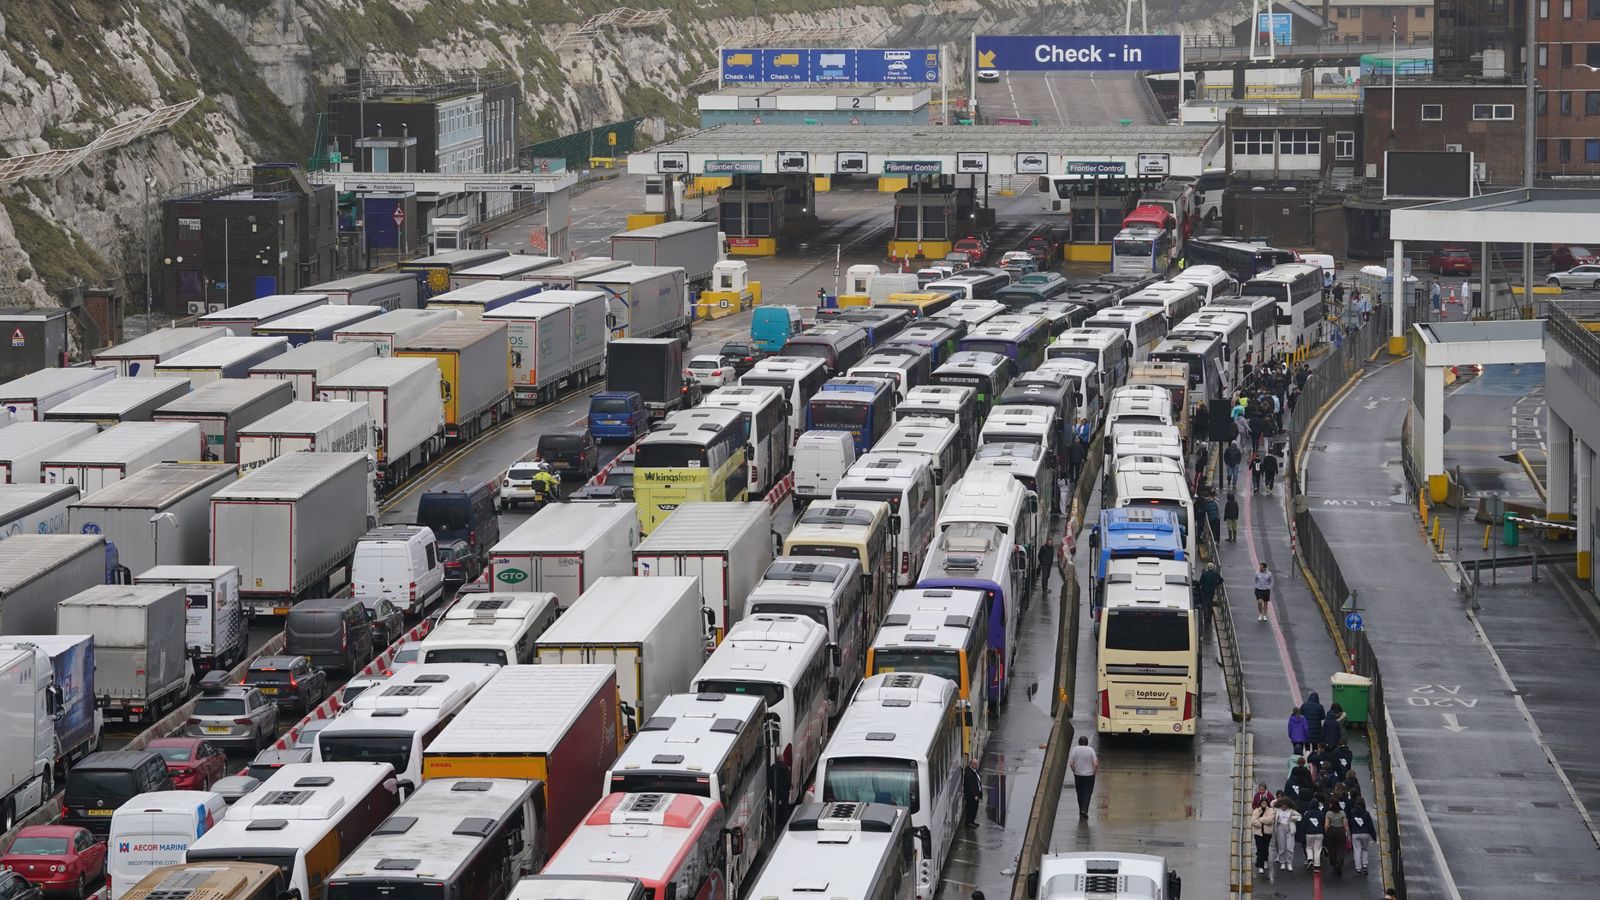 Port of Dover 'critical incident': Heavy traffic and queues at French border control cause long delays